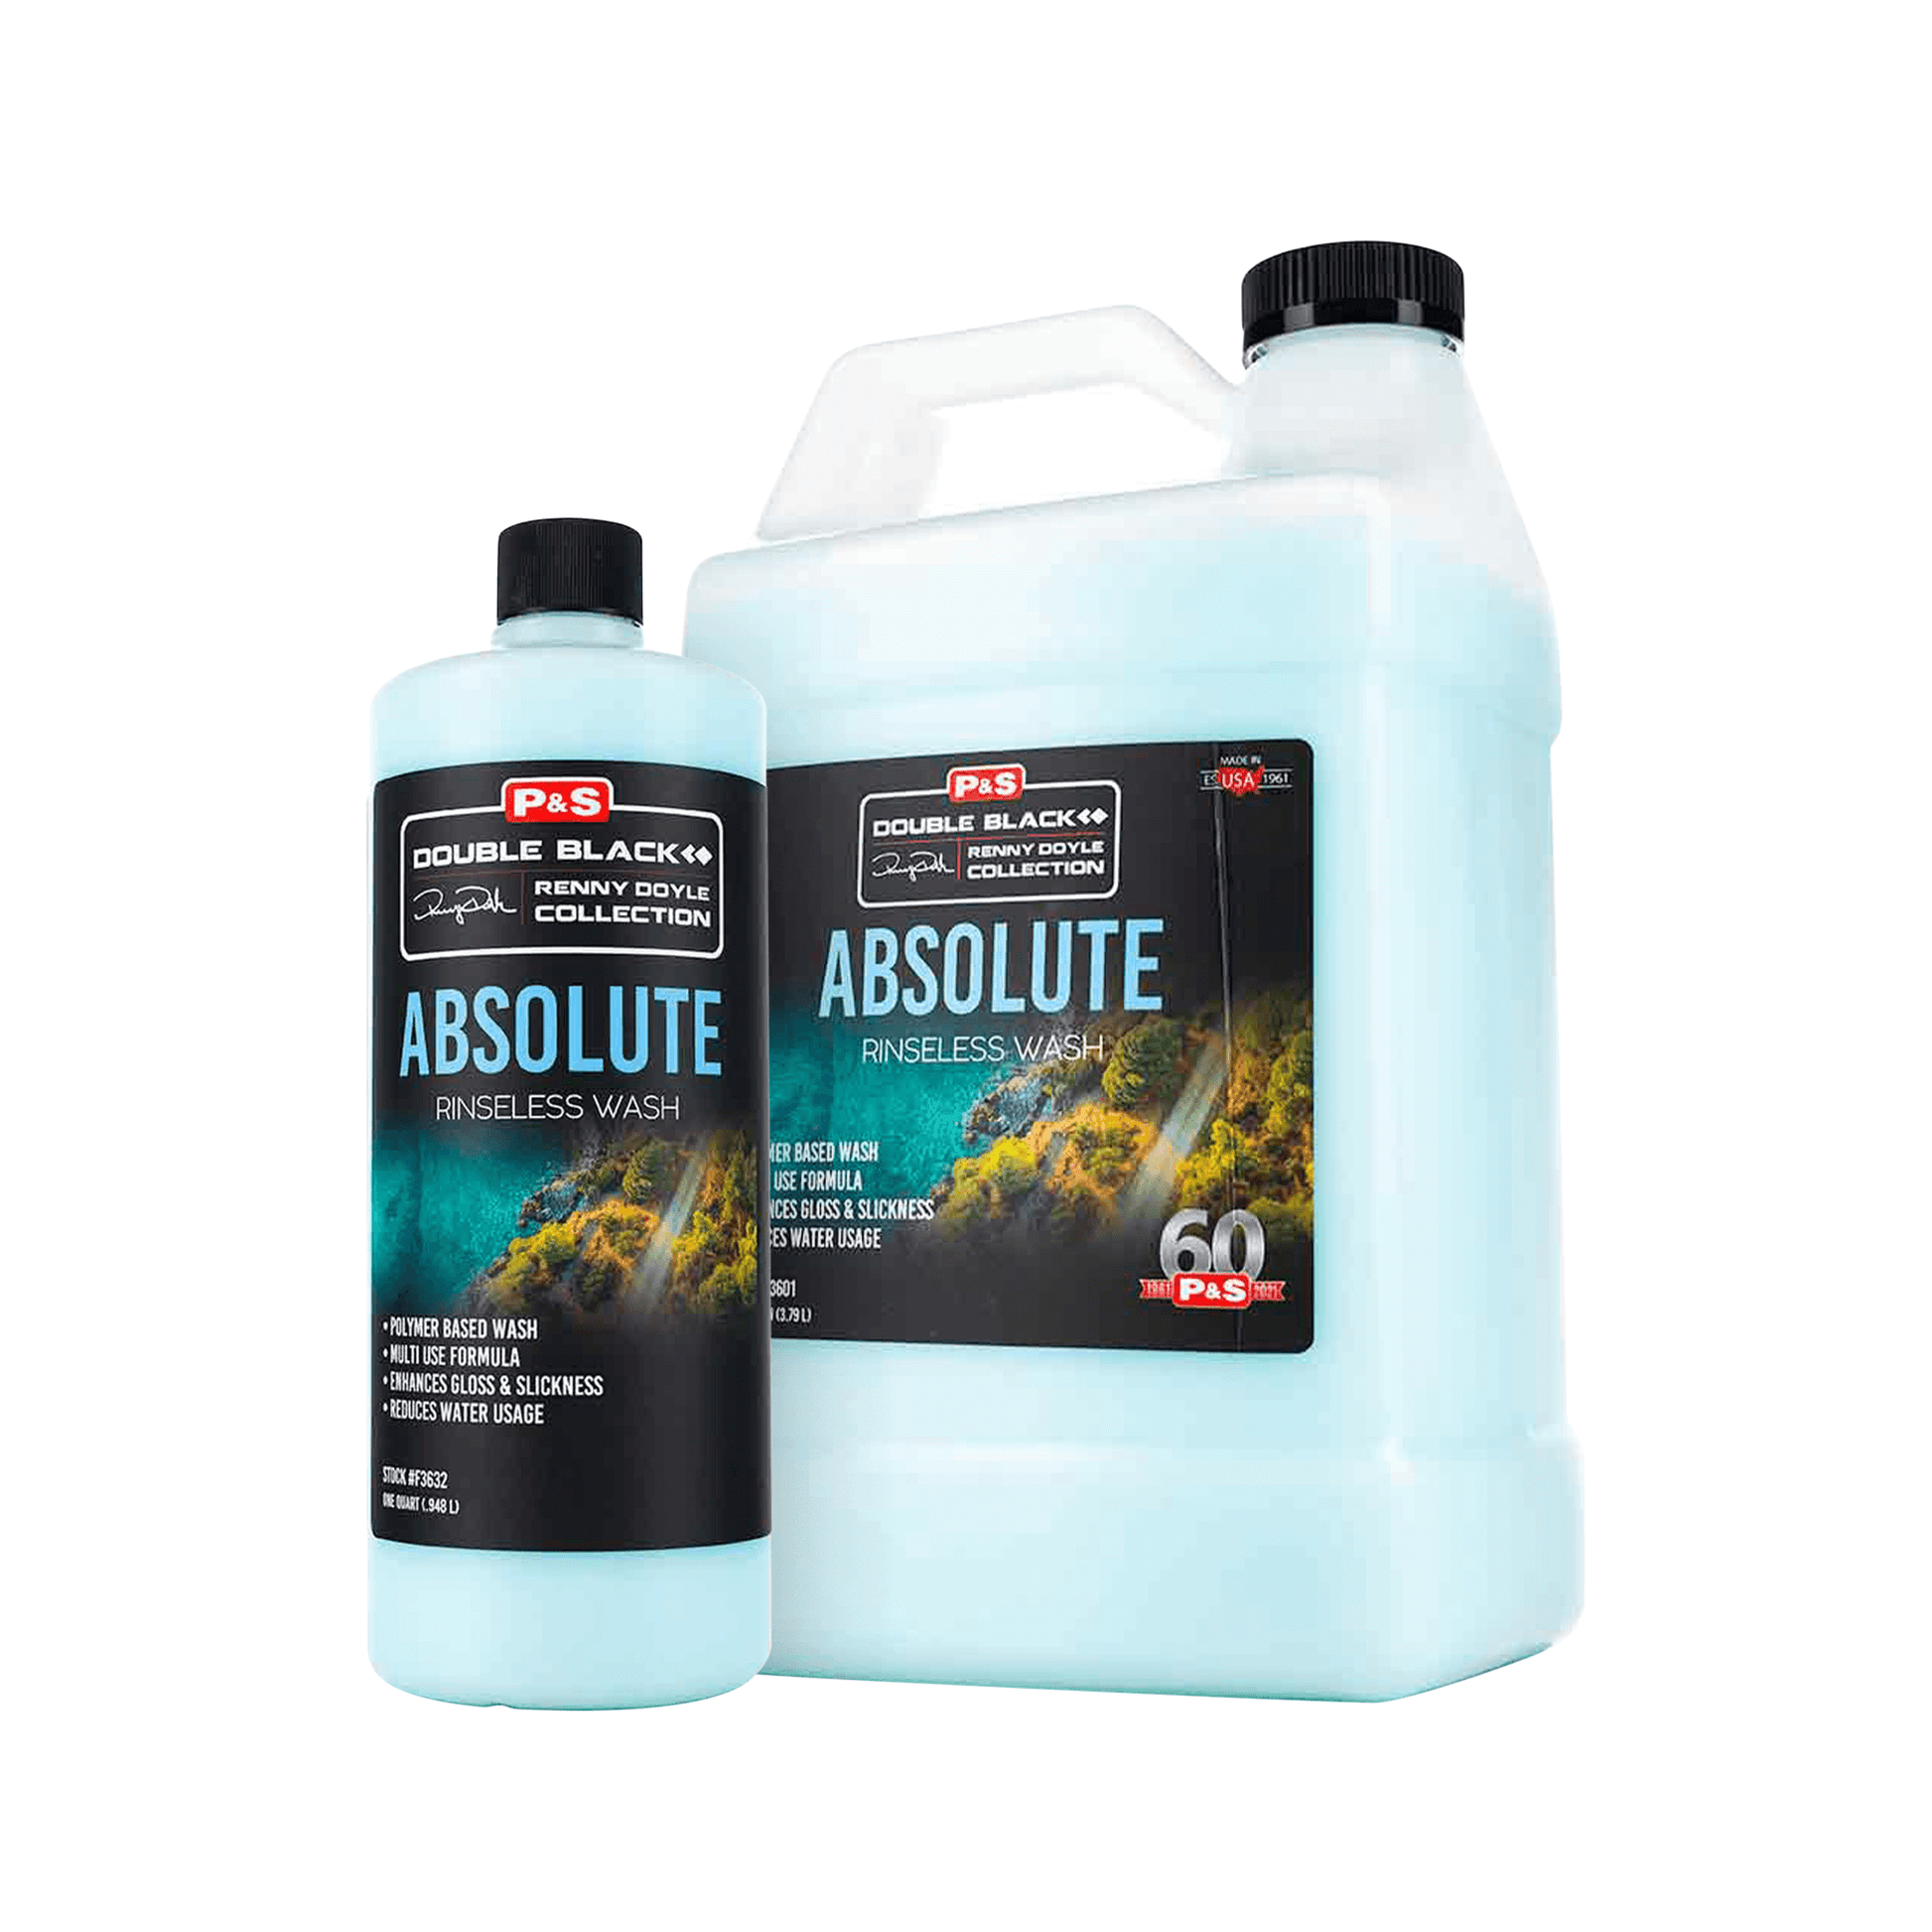 P&S Absolute Rinseless Wash - Gallon 